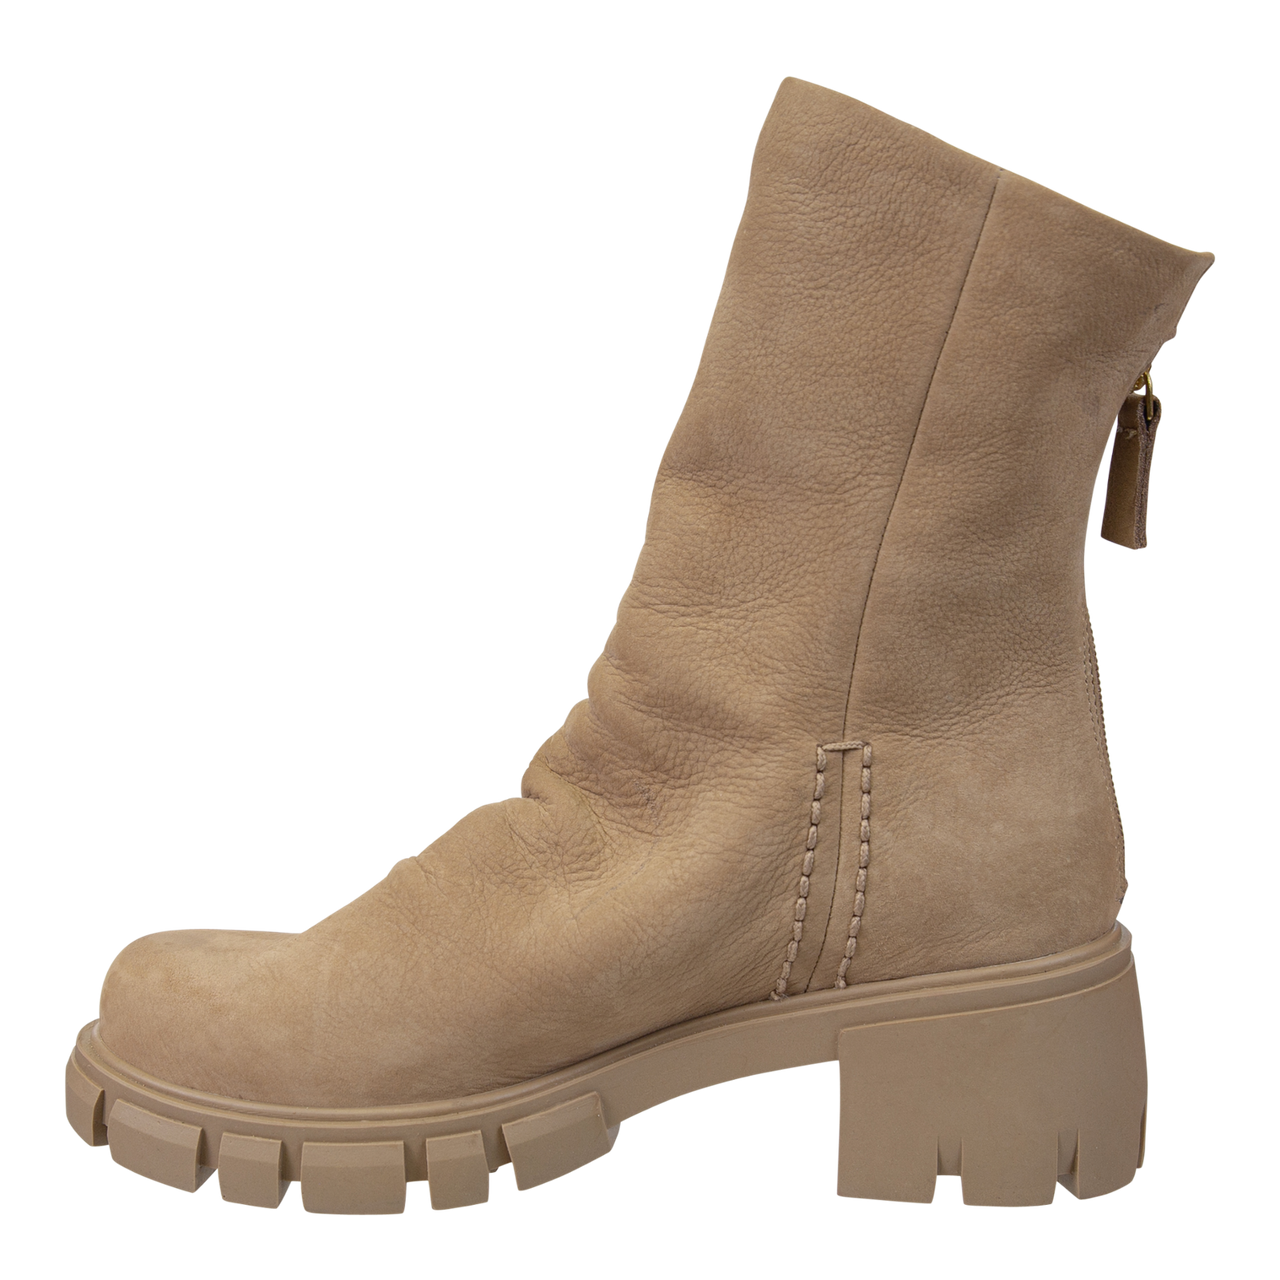 NAKED FEET - PROTOCOL in BEIGE Heeled Mid Shaft Boots